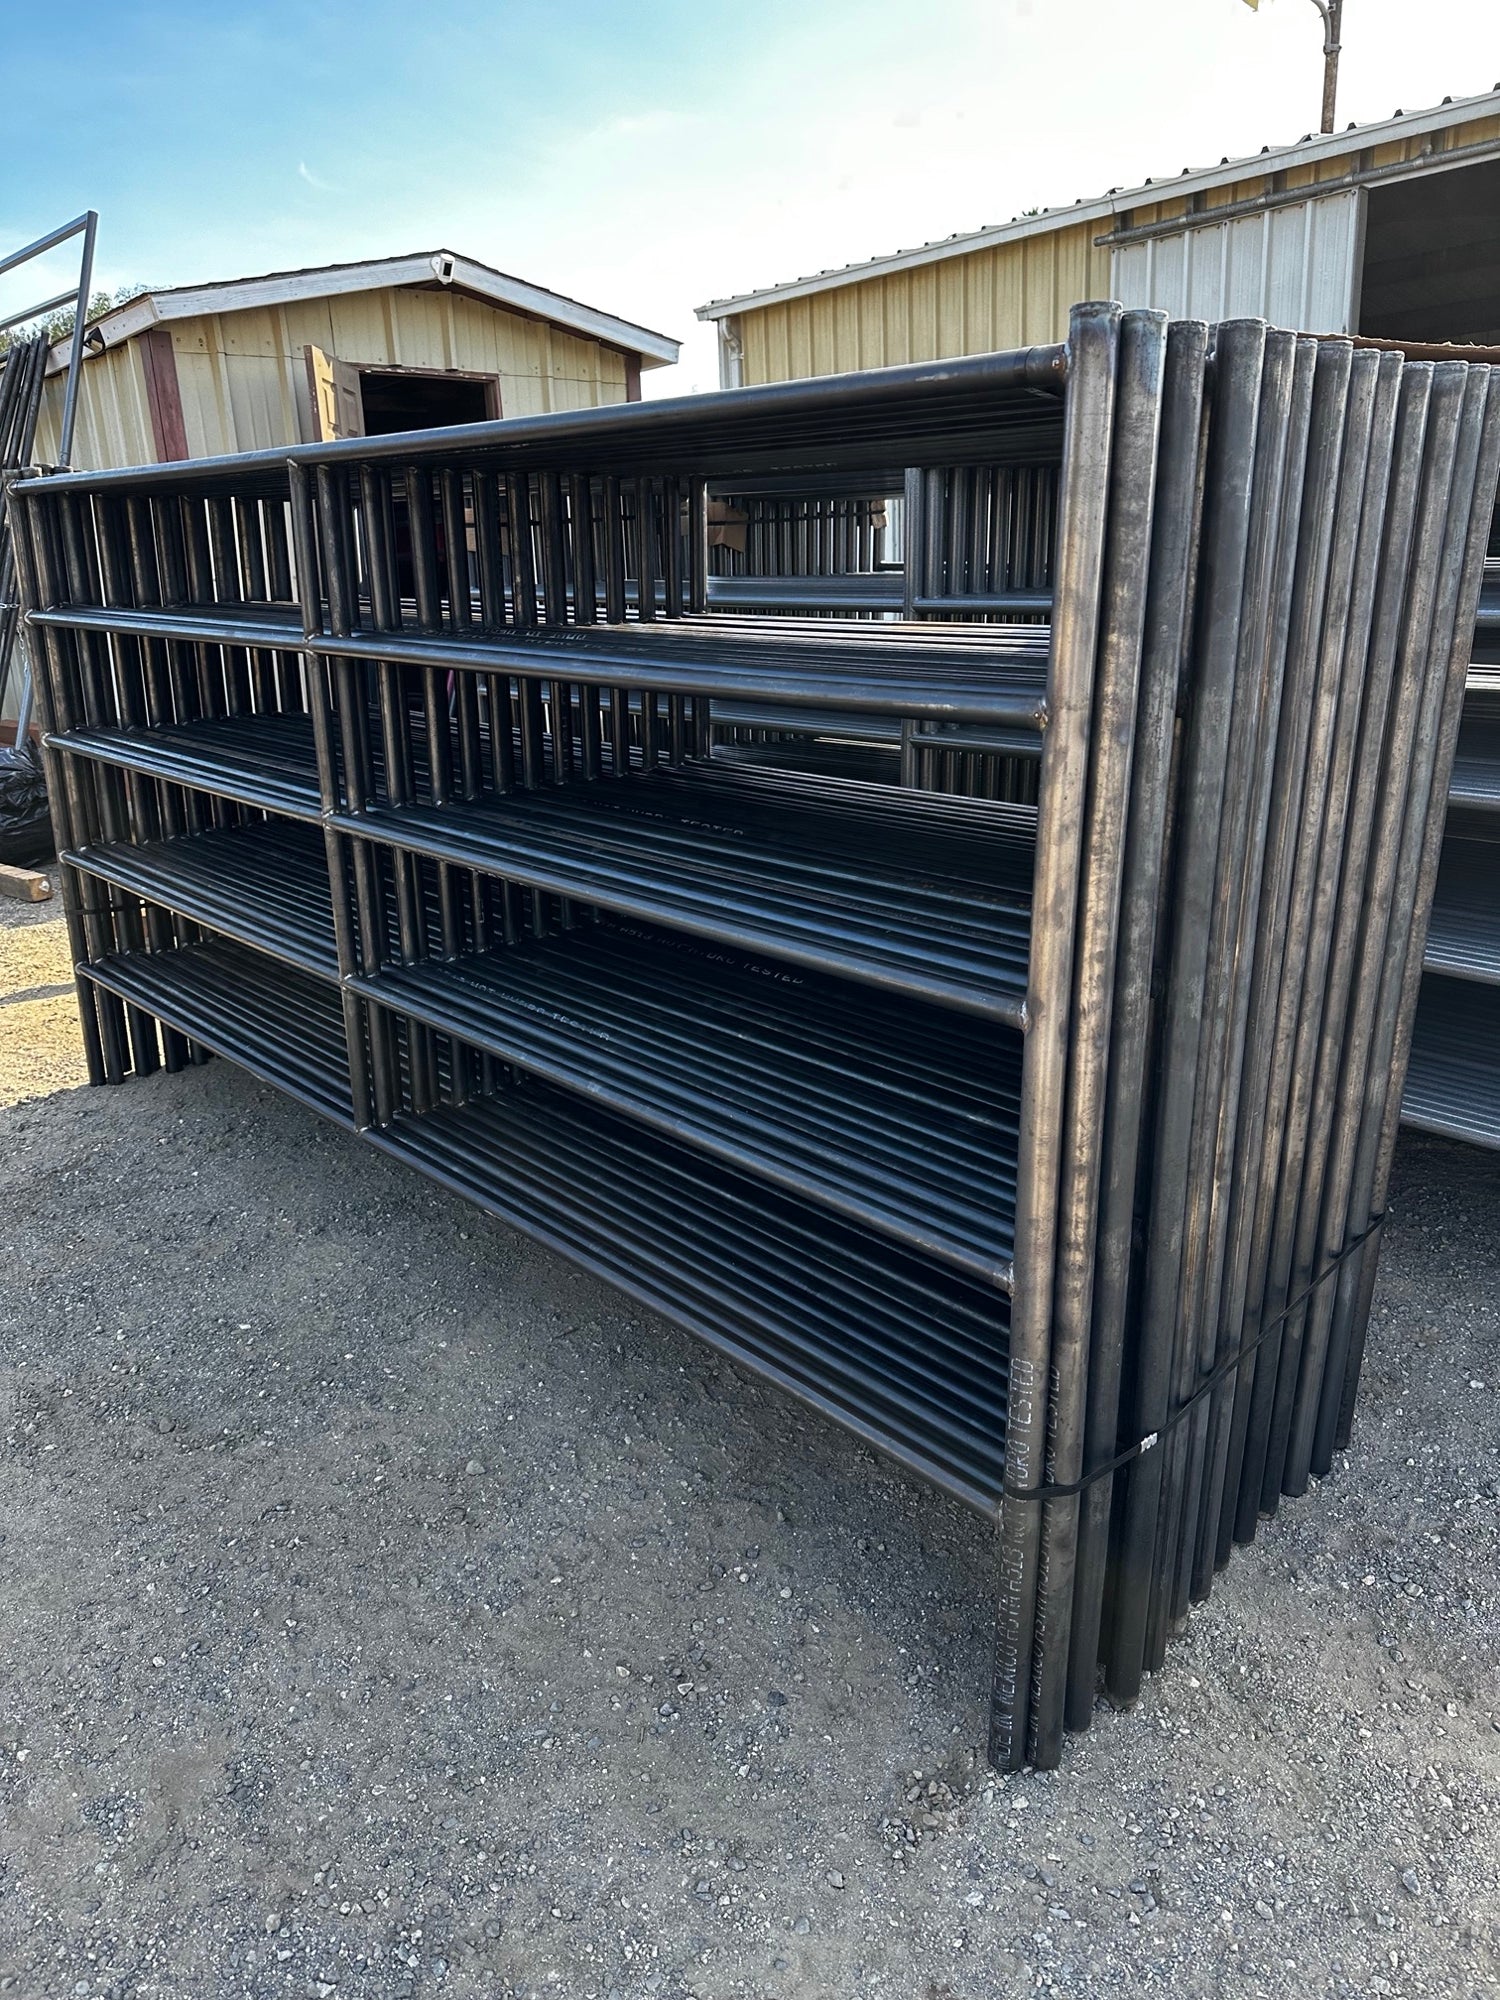 High-Quality Horse Corral Panels for Sale: Discover the Best Options from SoCal Fence and Barn